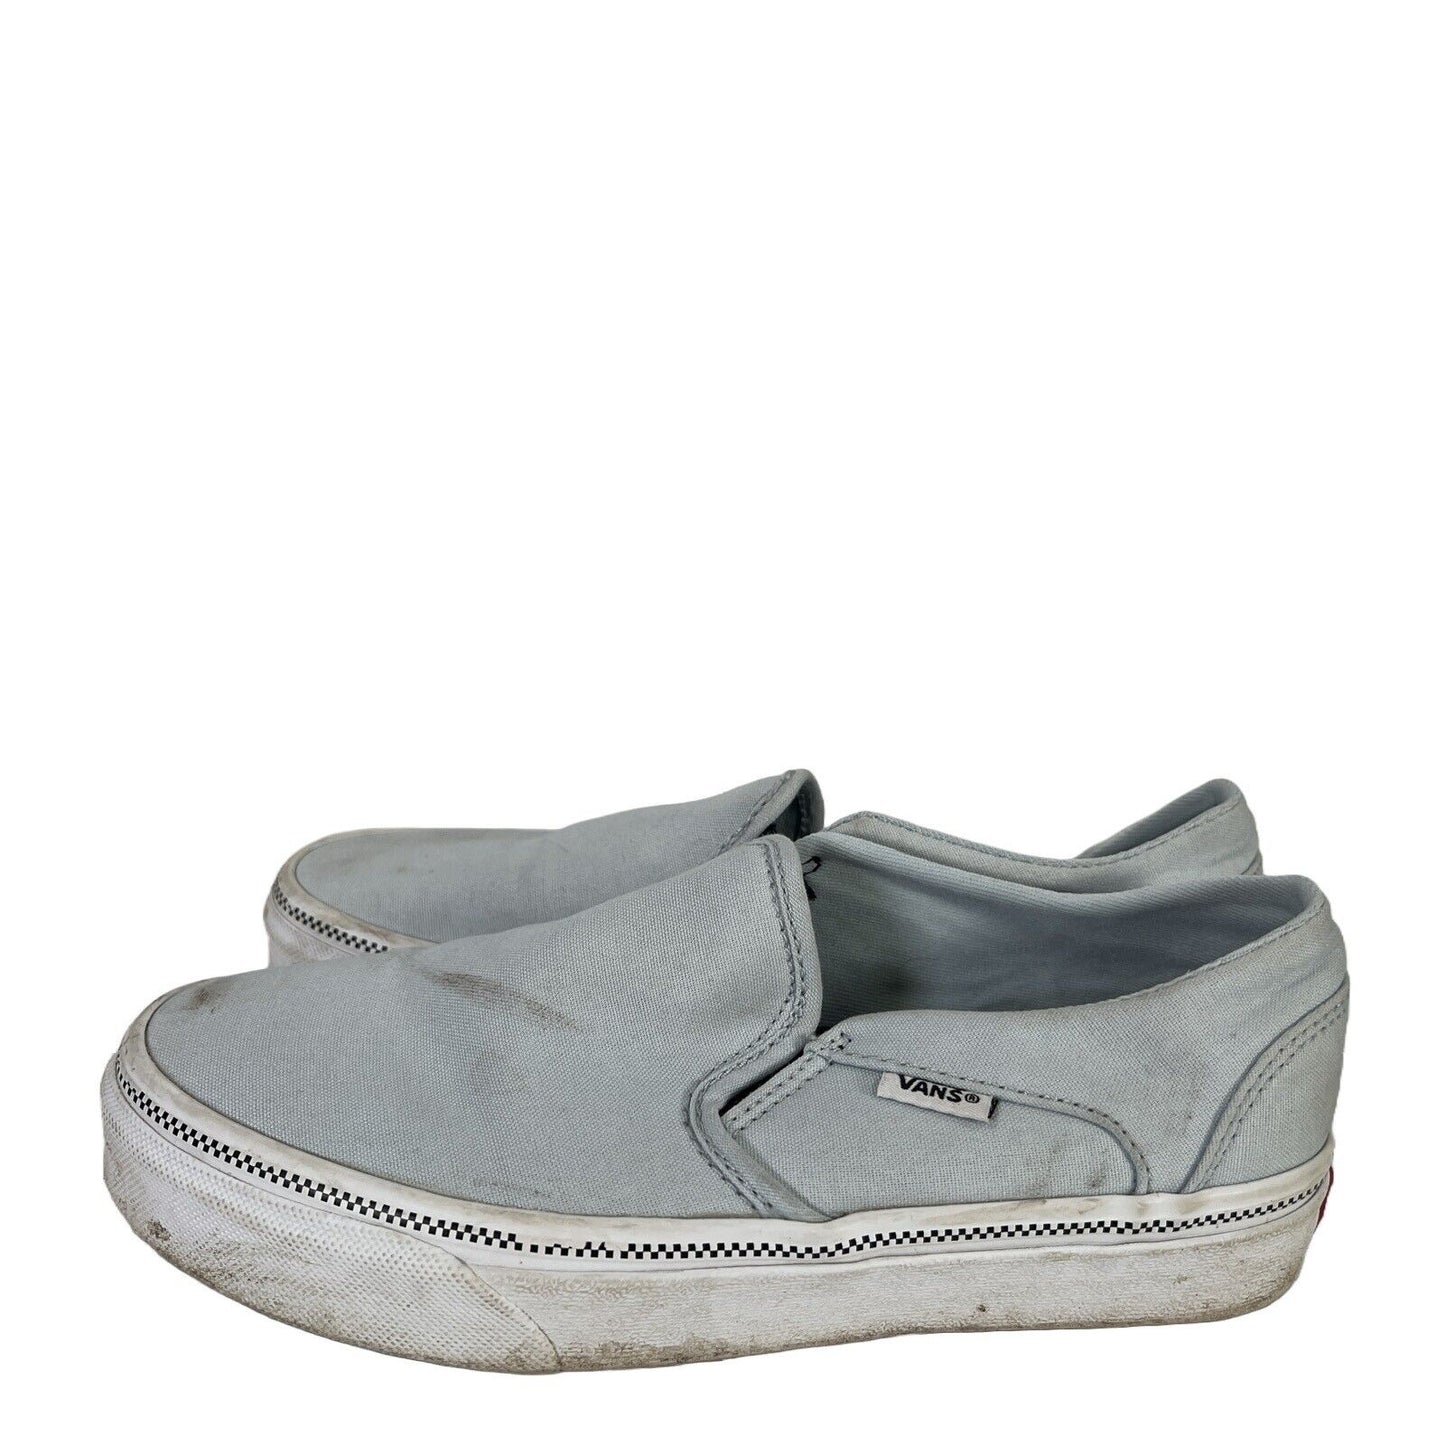 Vans Women's Blue Canvas Slip On Casual Loafer Sneakers - 6